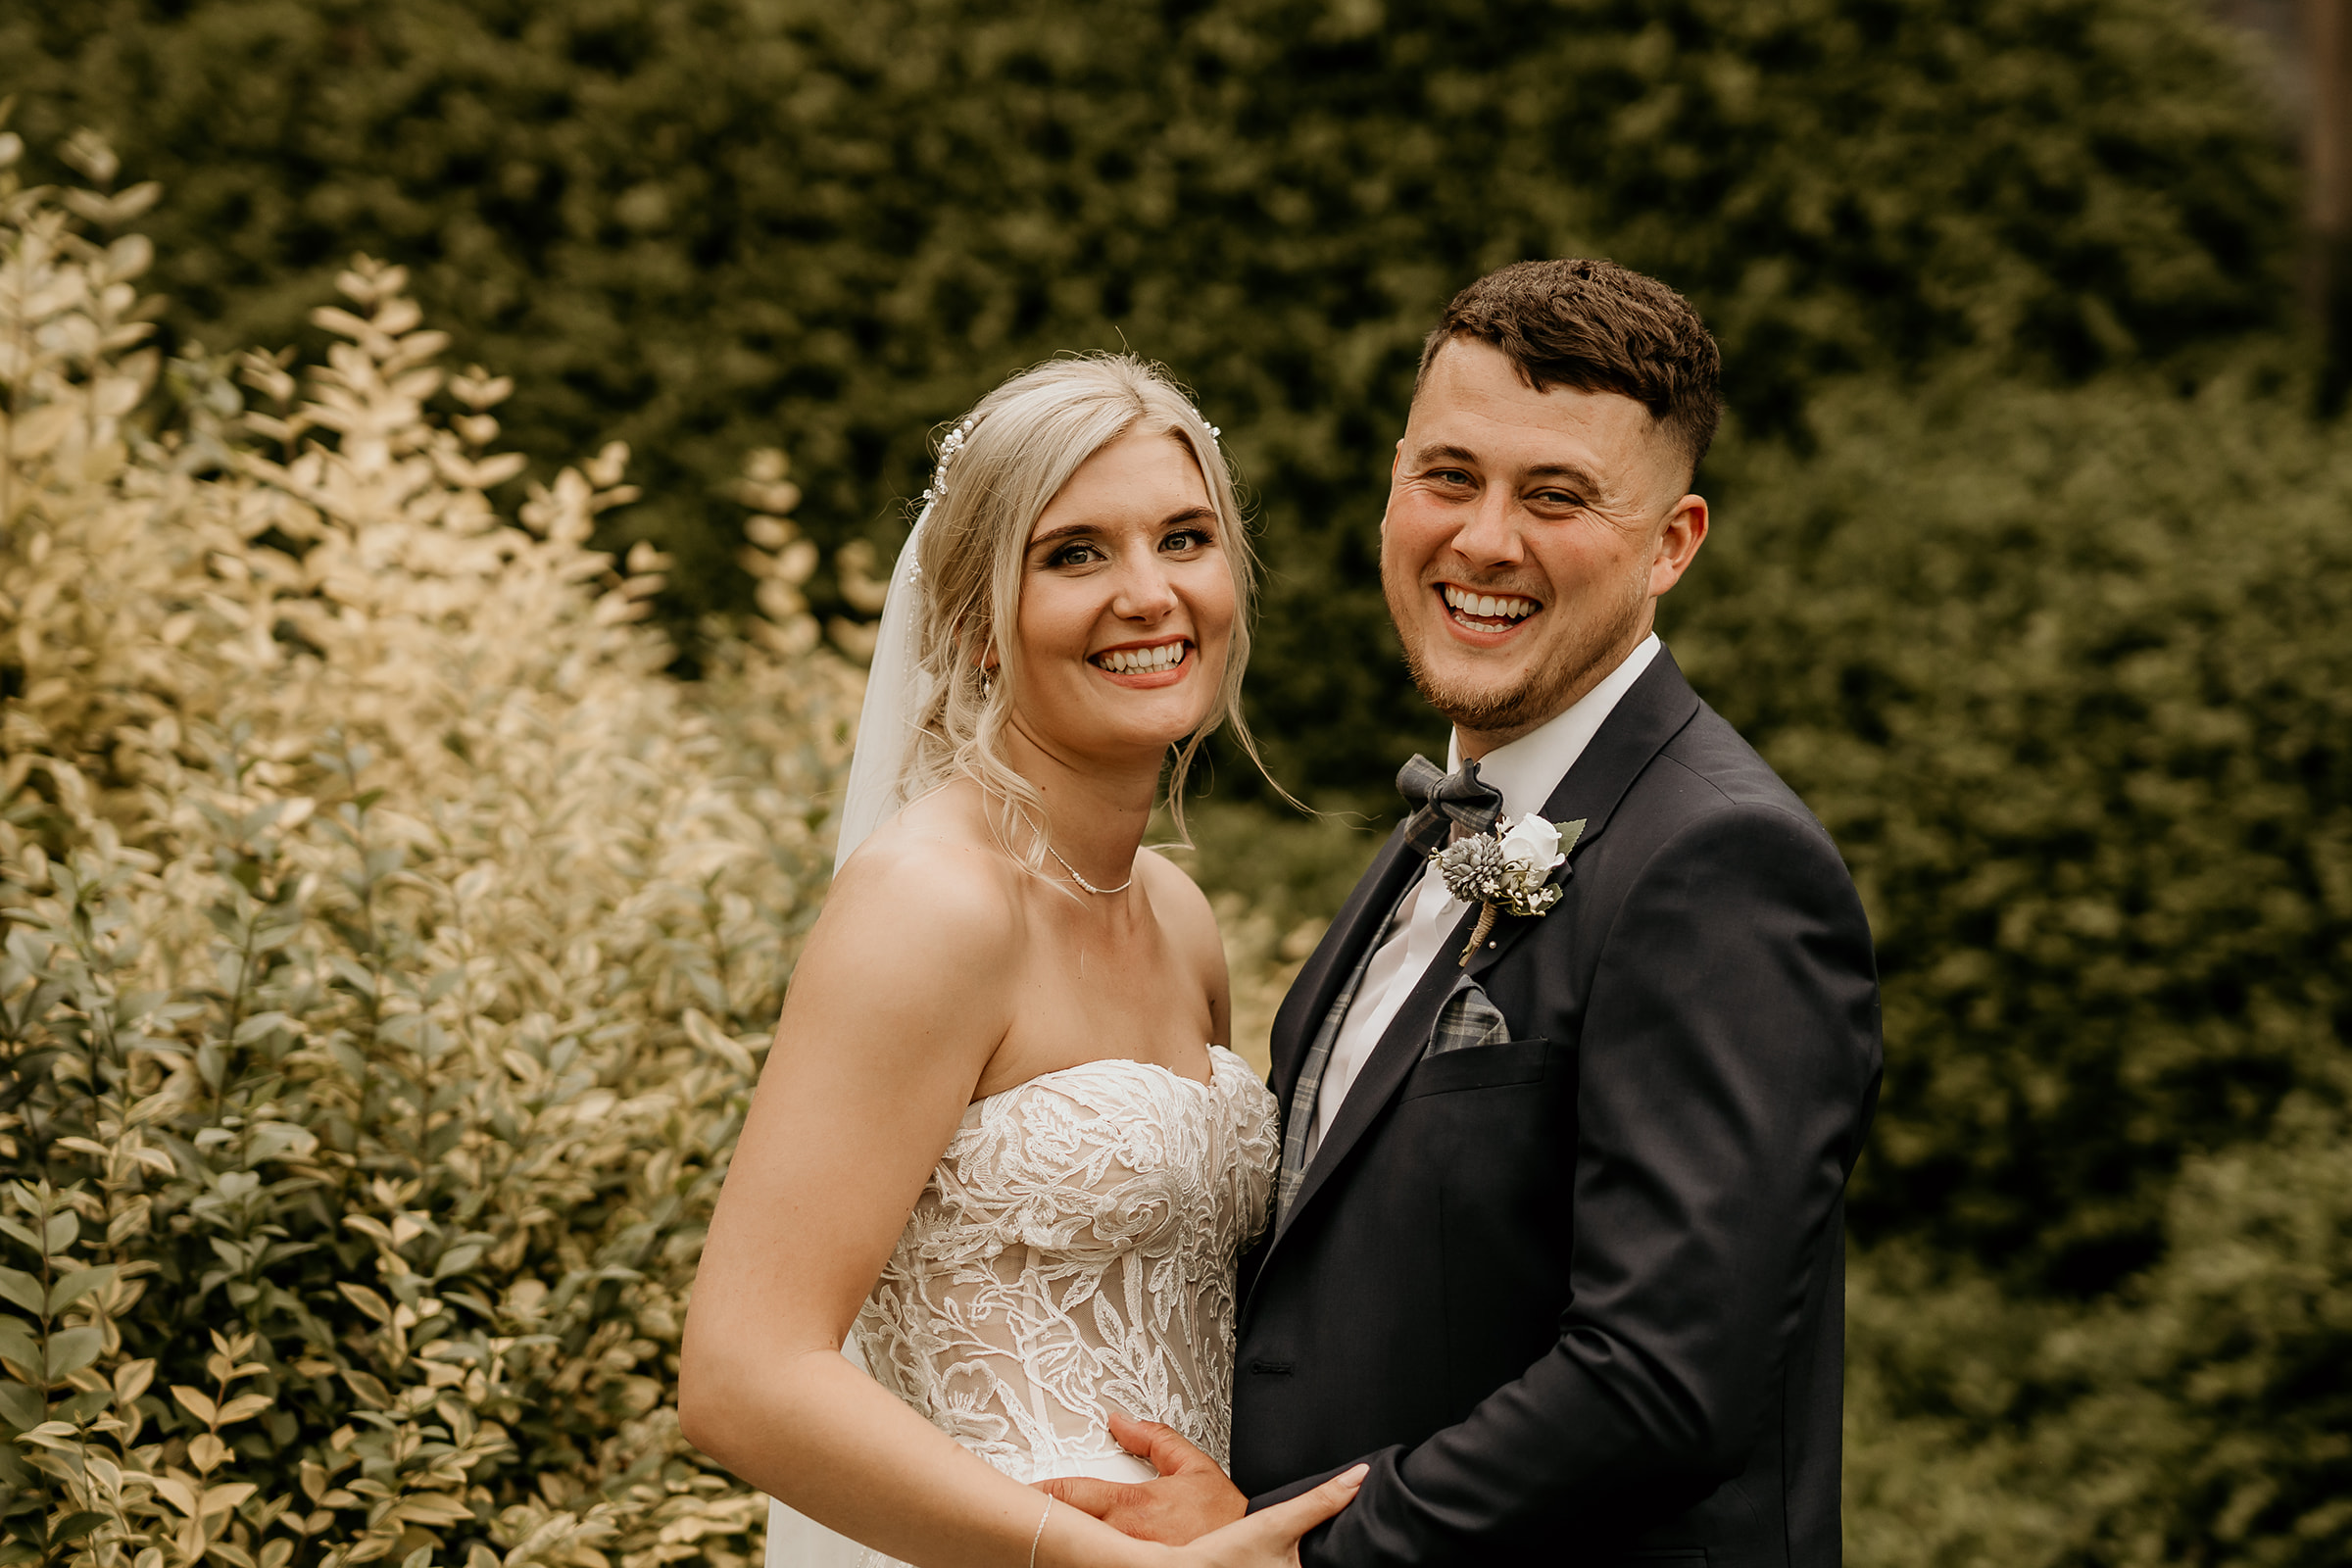 Bride and groom at Hooton Pagnell Hall